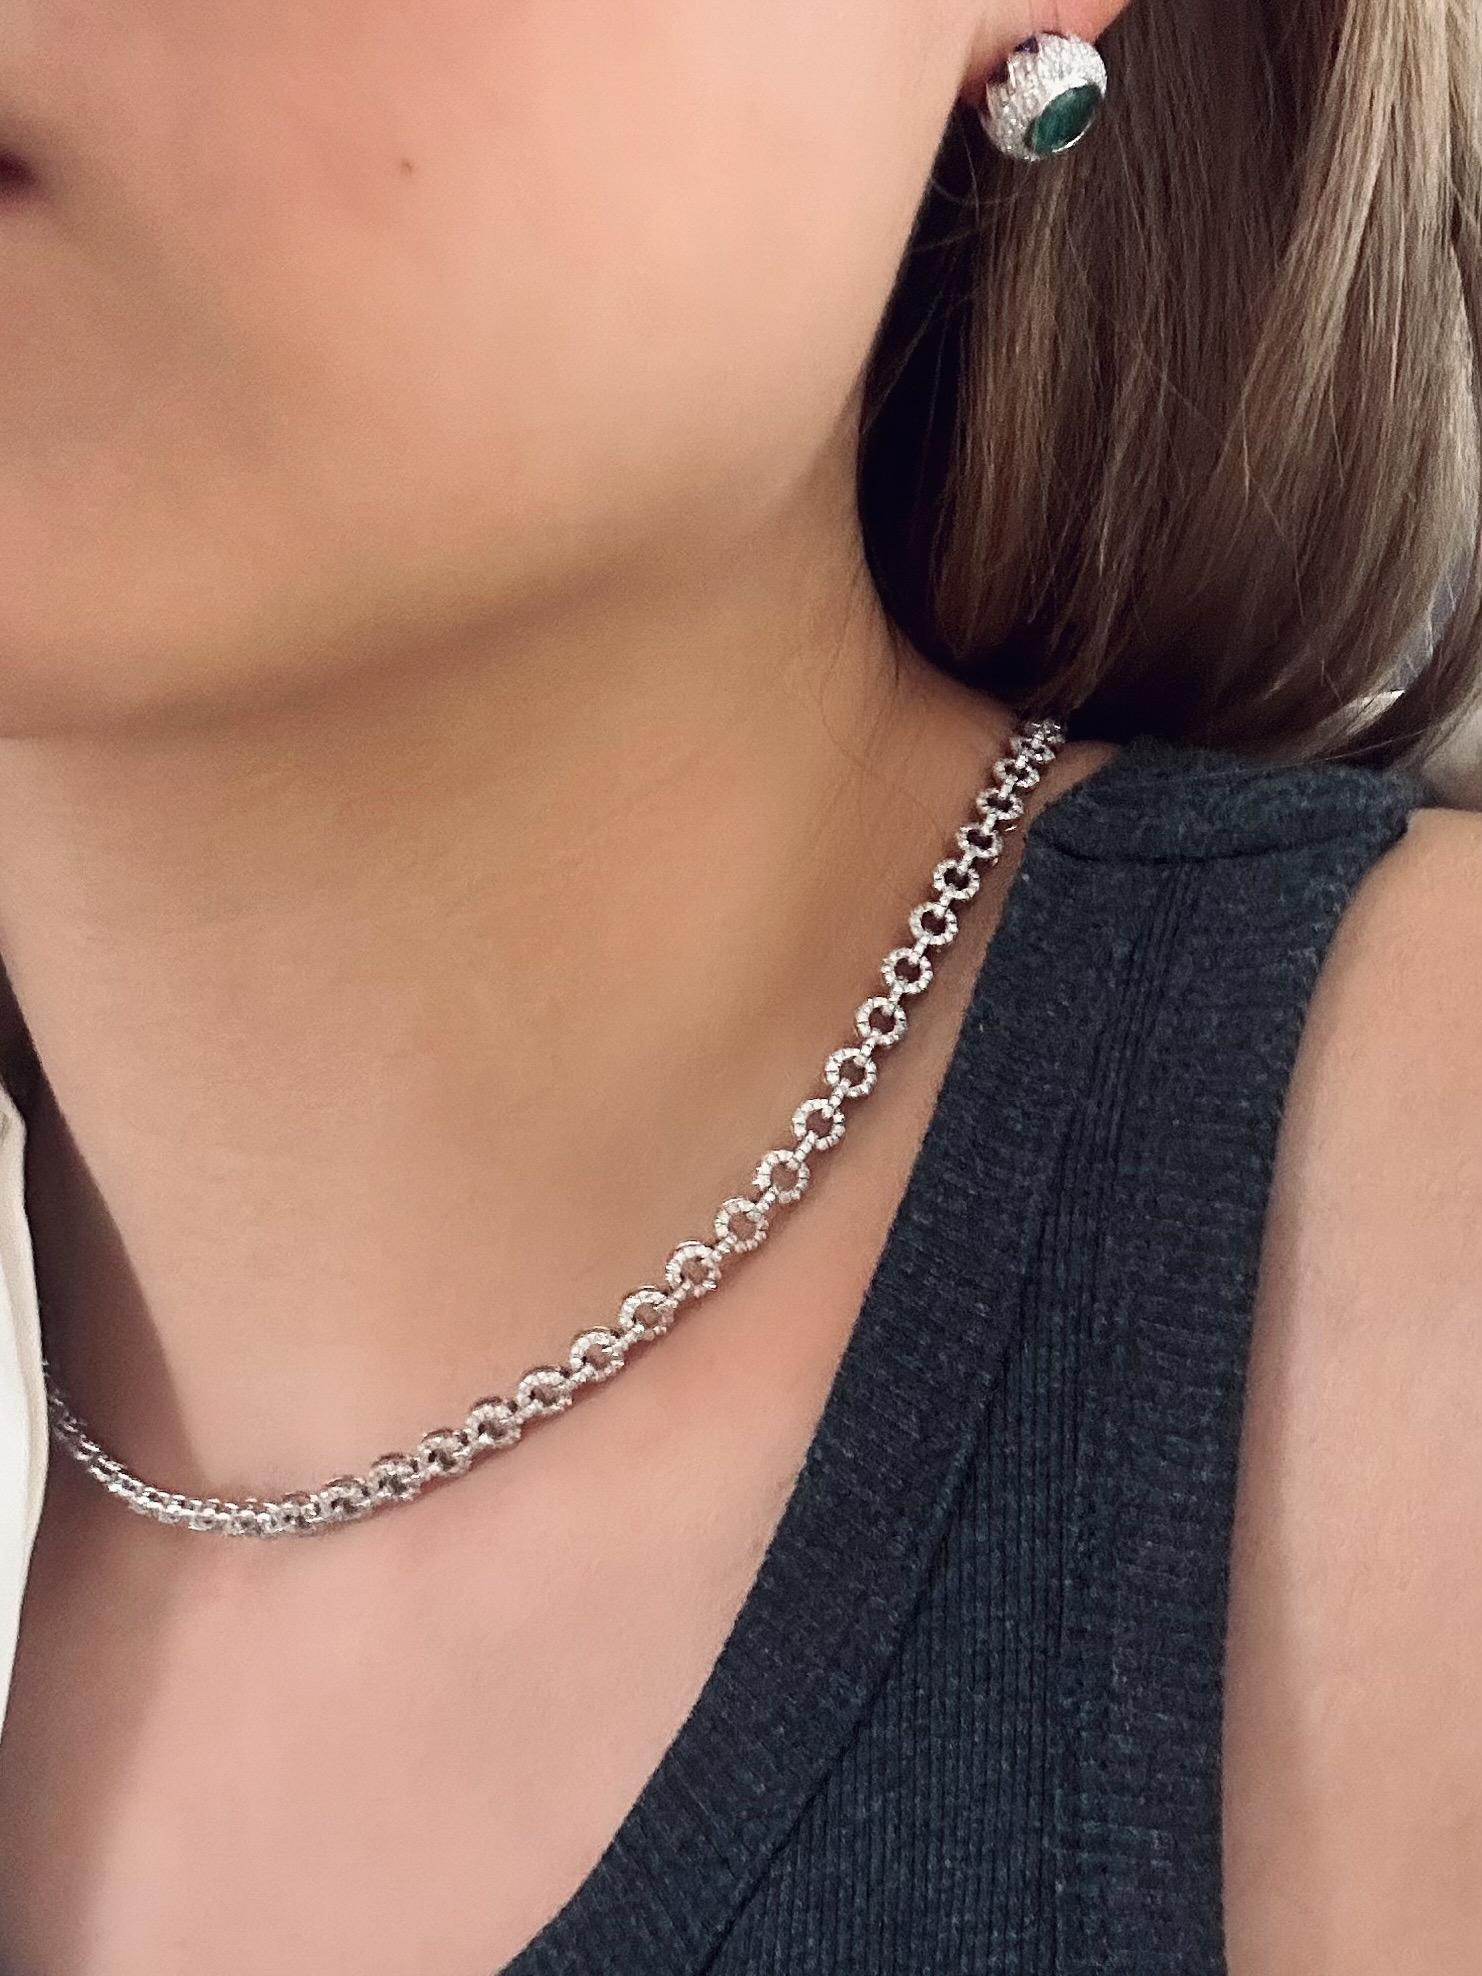 A new take on the diamond tennis necklace stack - wear yours alone or with your existing necklace layers - of curb chains, tennis necklaces etc. Comes in 17 inch and 20 inch versions. Other lengths are available for pre order. Diamond links go all